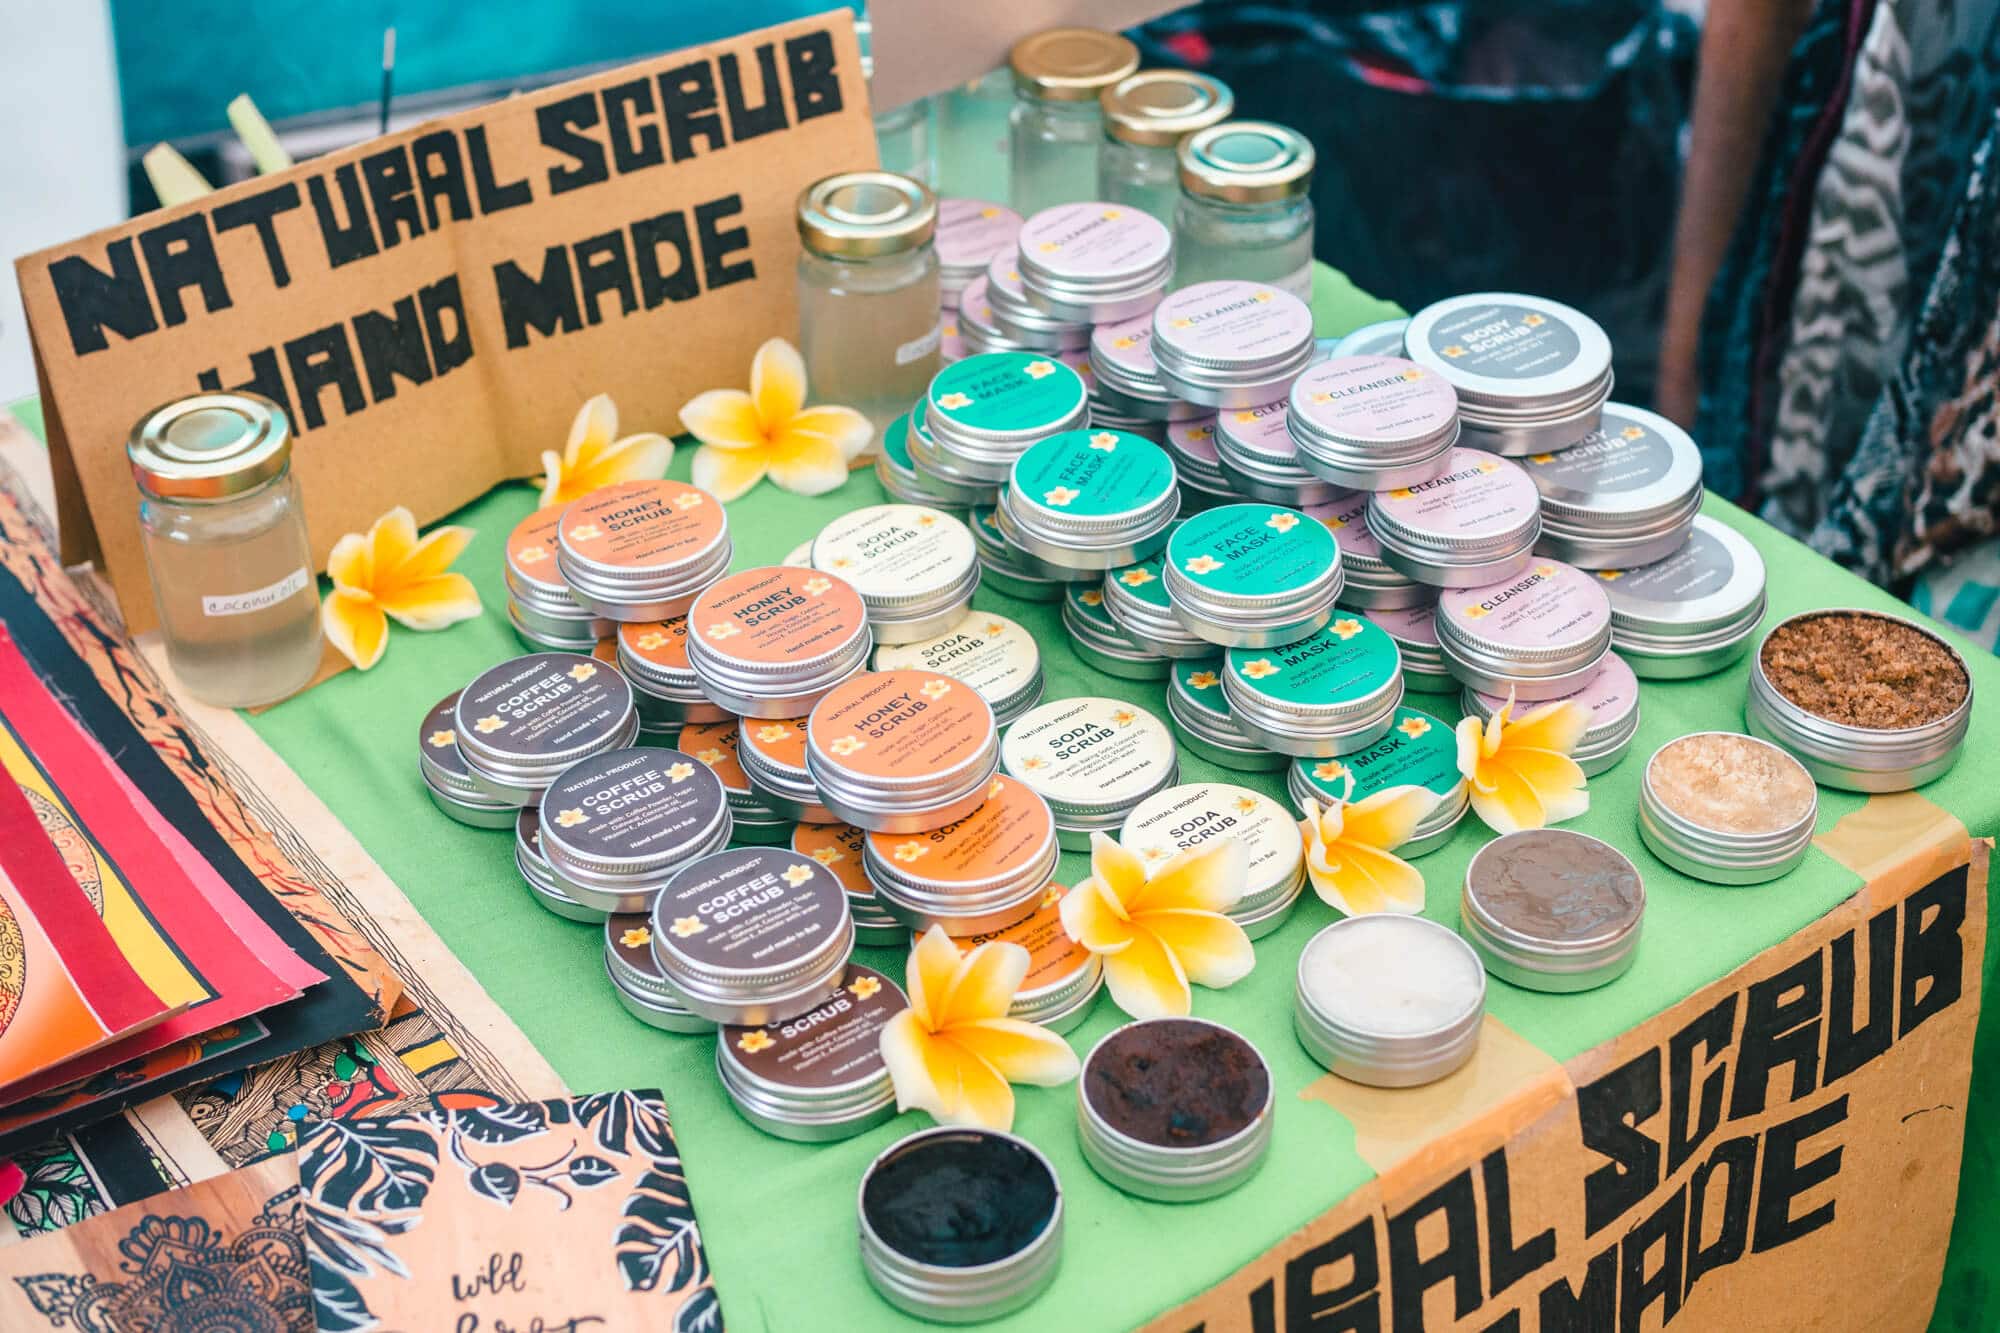 3 super cool markets in Canggu, Bali where you can buy jewelry, organic food, natural skin care, vintage clothing and other beautiful handicrafts - Love Anchor Weekend Bazar